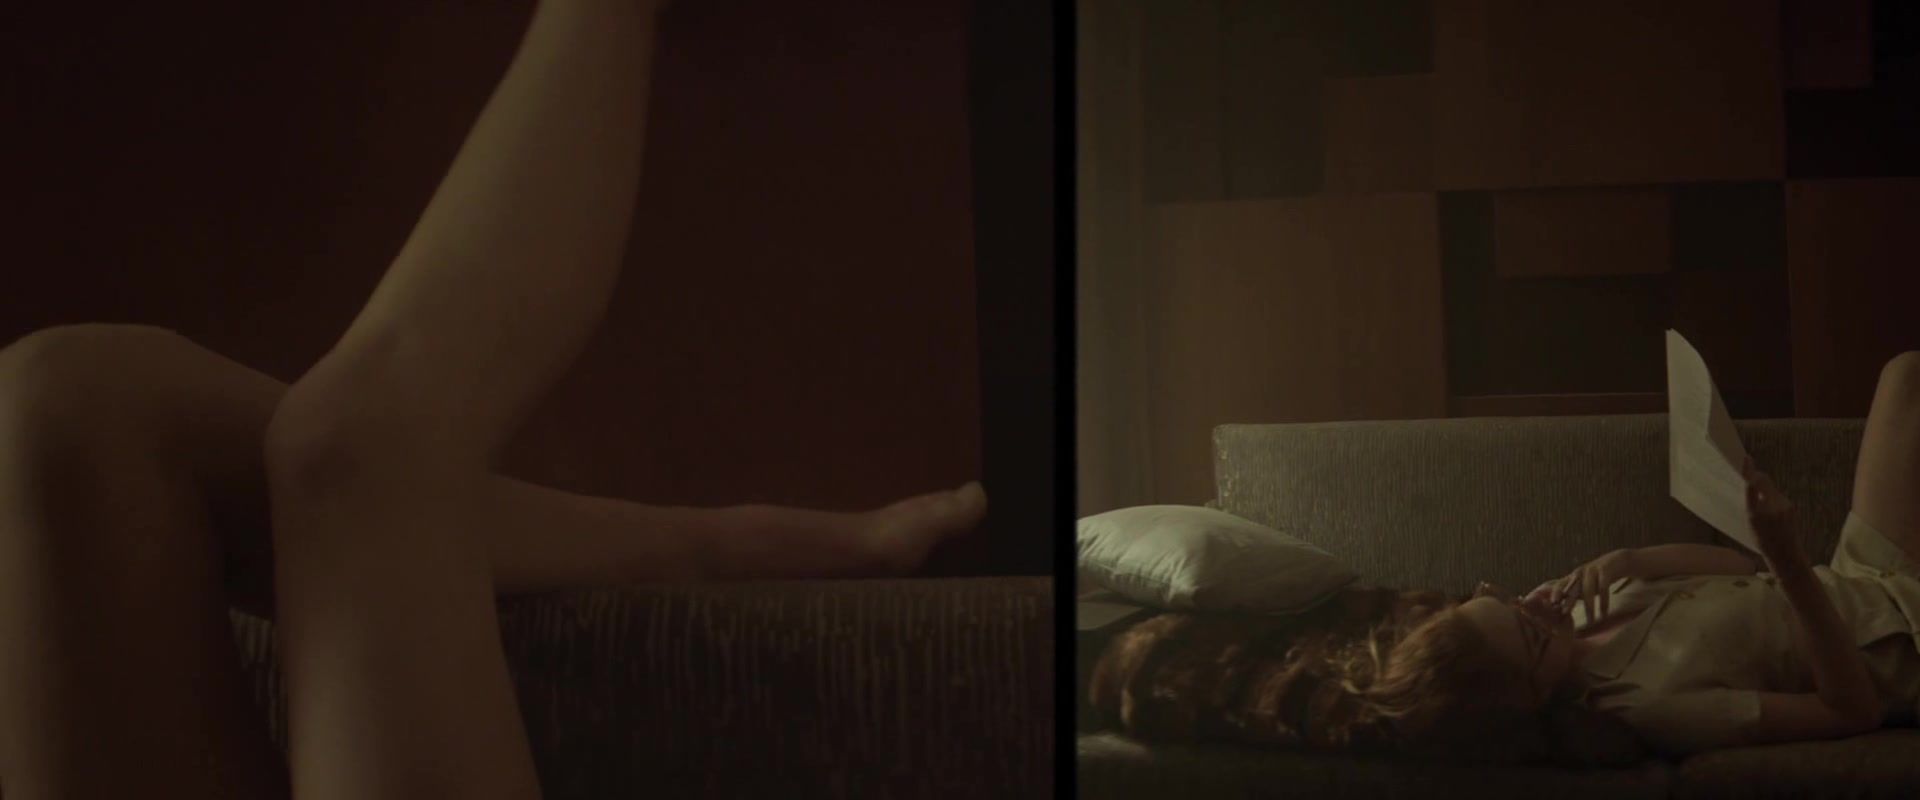 Phat Ass Naked Freya Mavor, Stacy Martin - The Lady In The Car With Glasses & A Gun (2015) (Sex, Topless Scenes) Lesbo